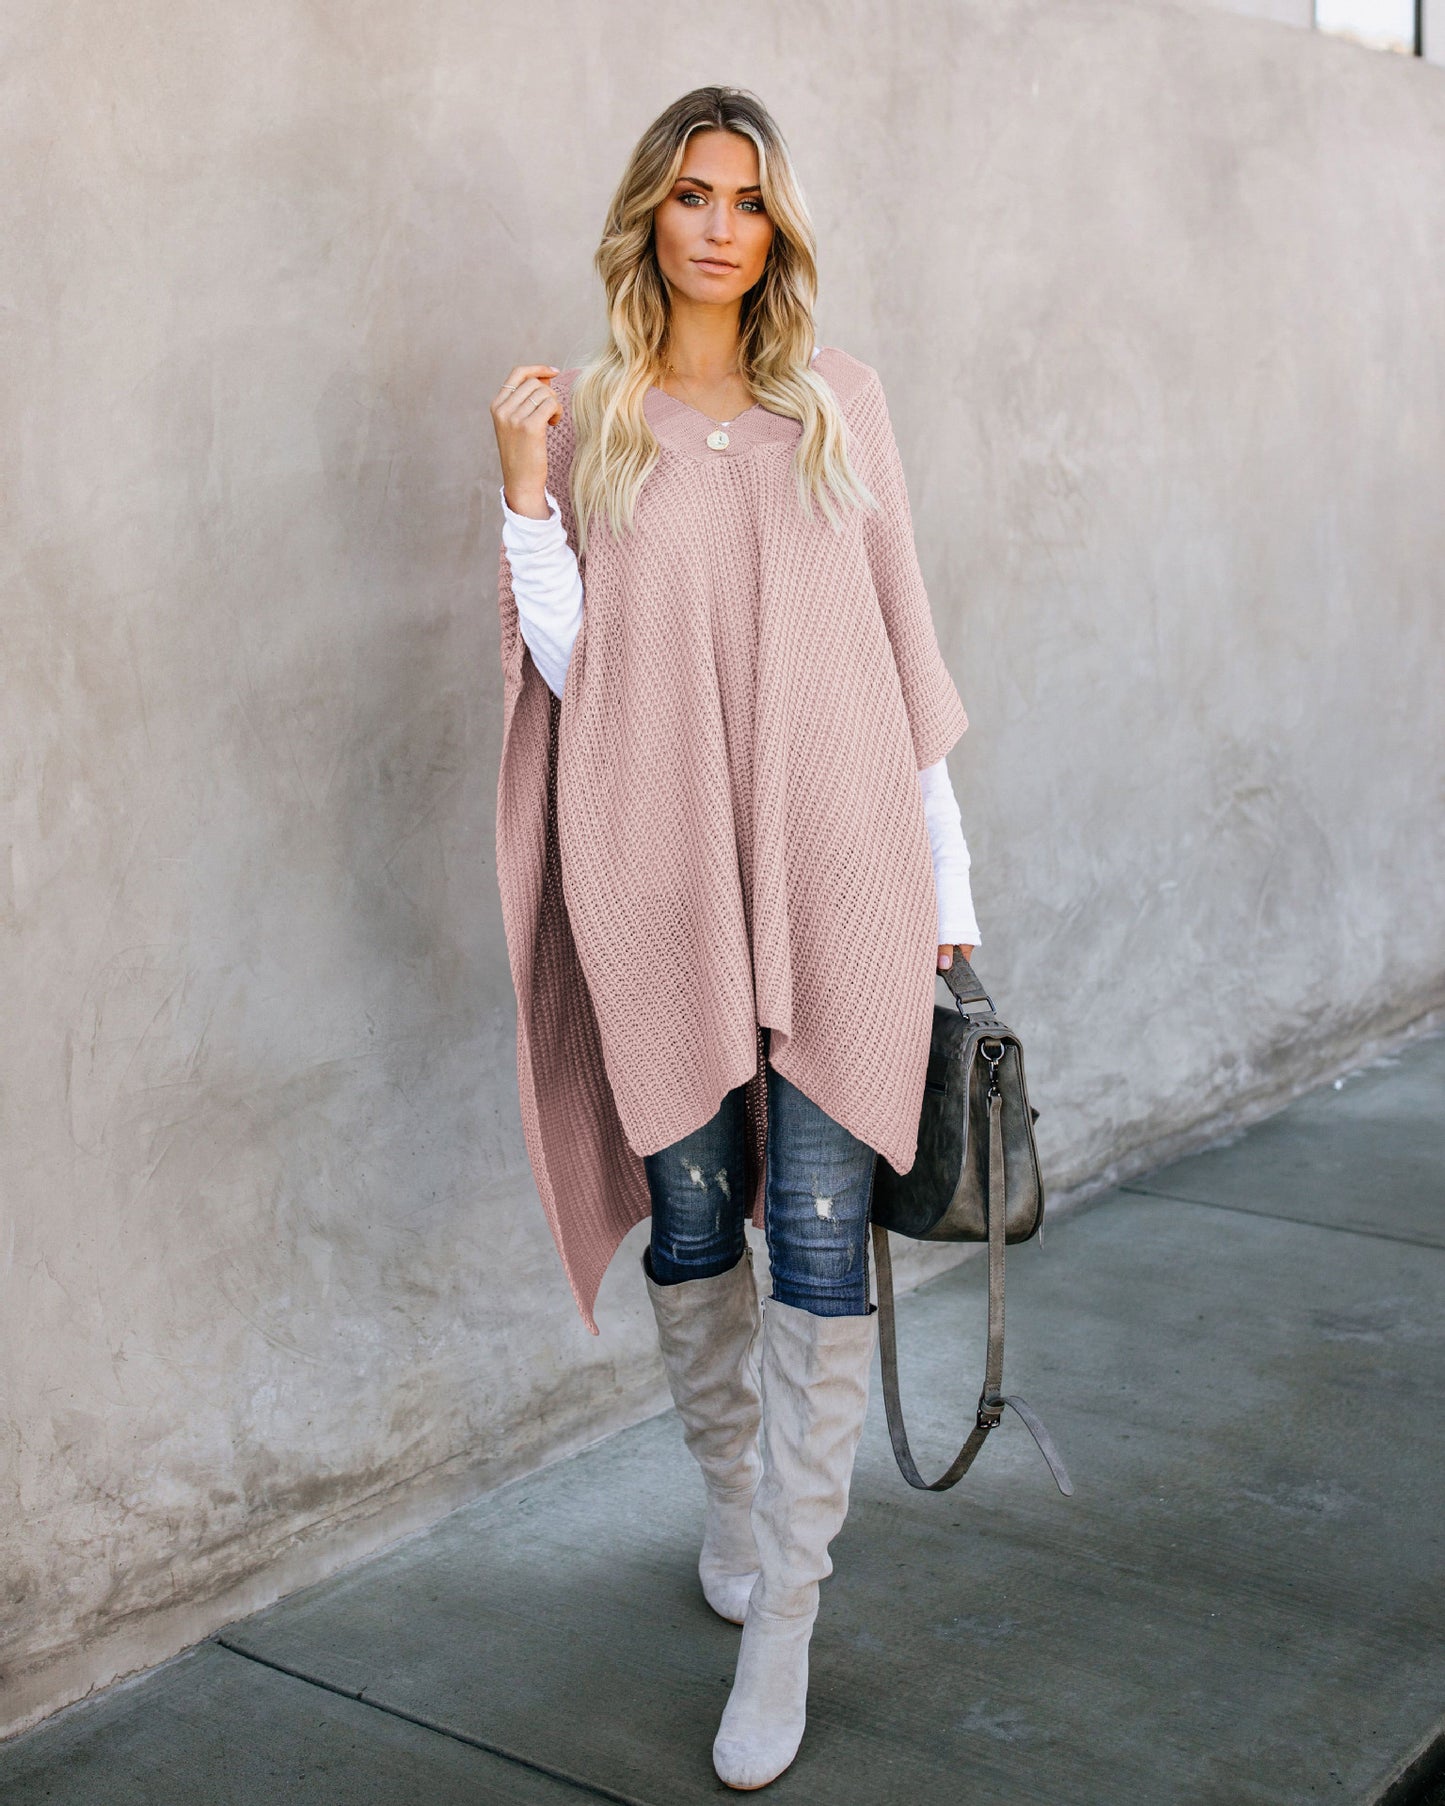 Cape sweater knitted top sweater